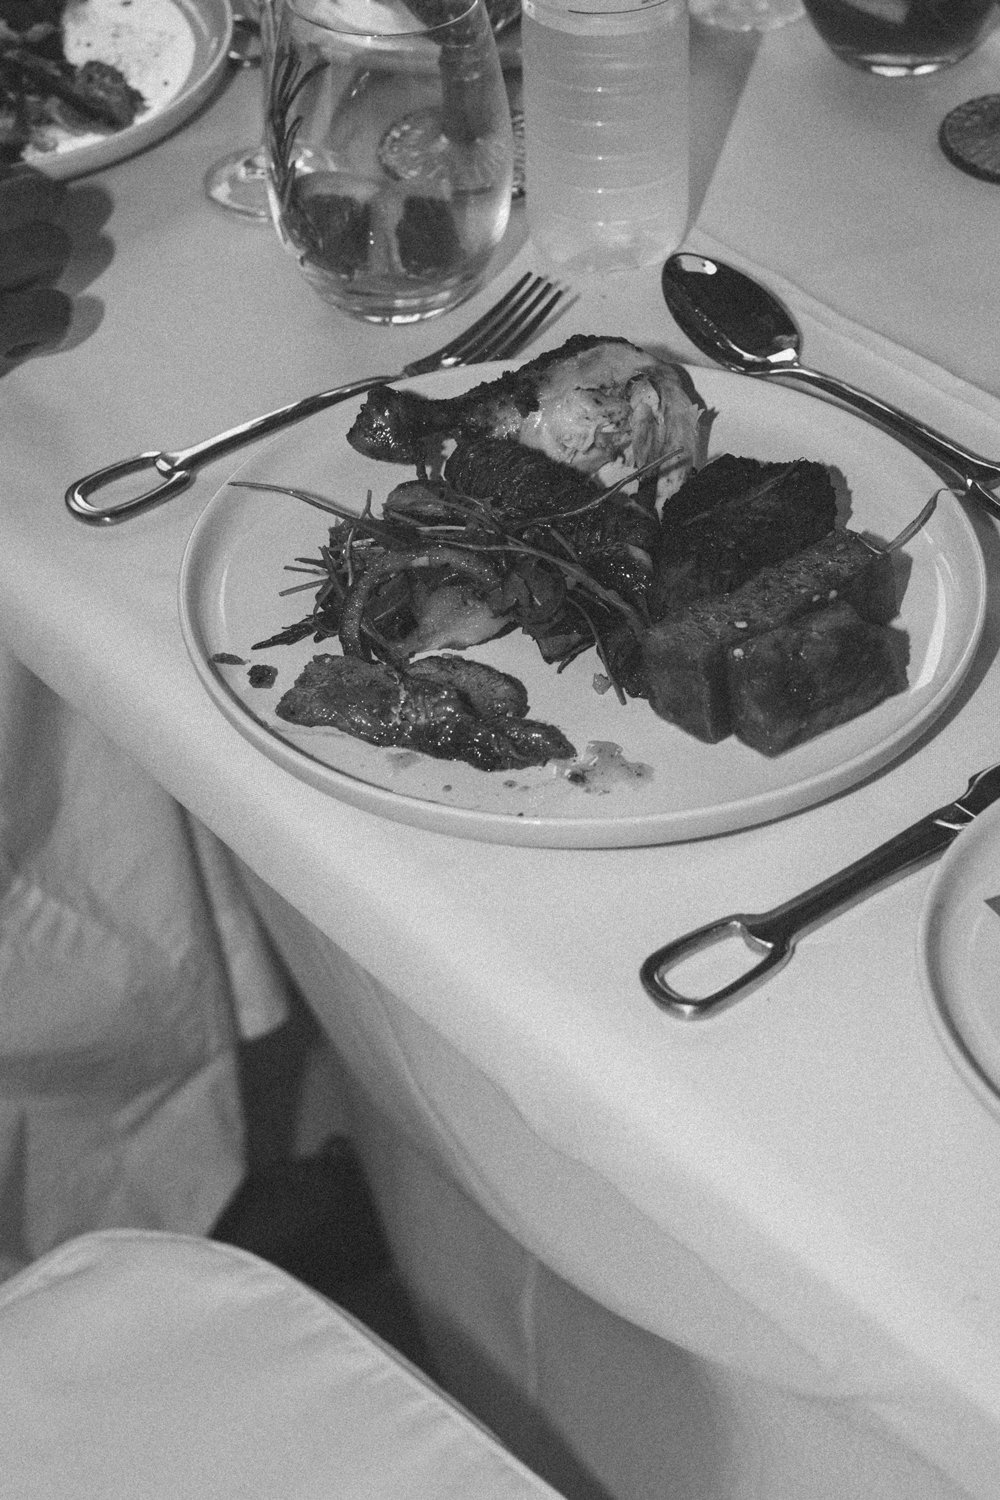 HOSTED-Dinnerparty-plate-of-food-black-and-white.jpg